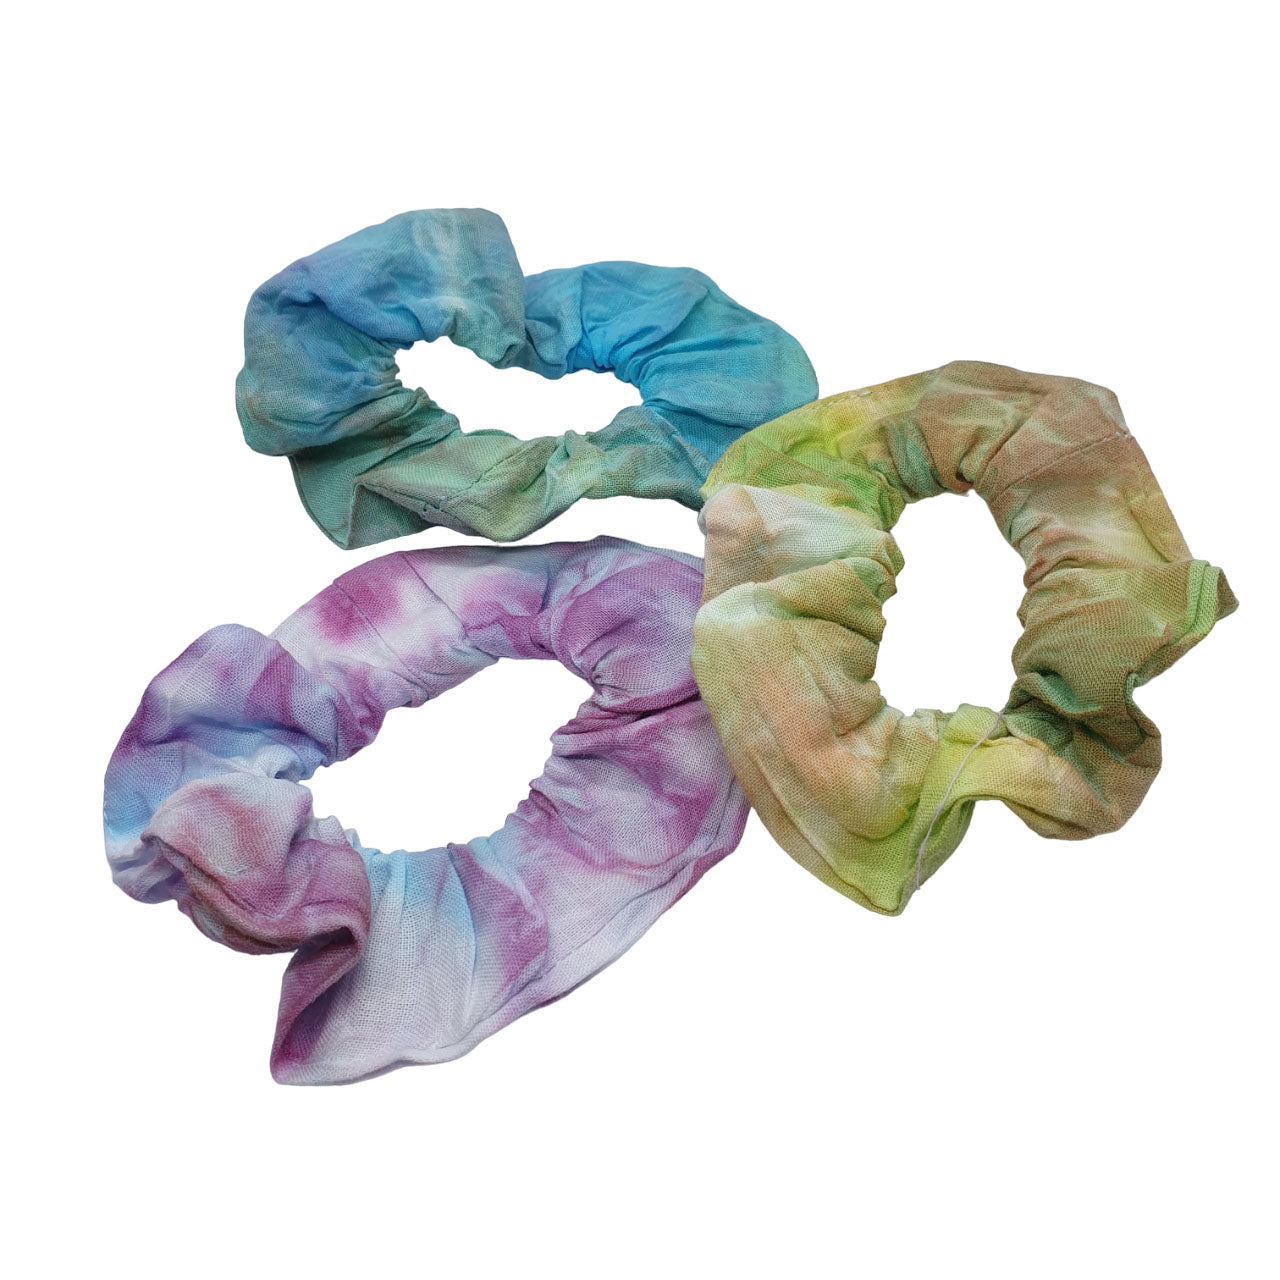 elasticated hair bobbles in blue, pink and green, tie dye effects